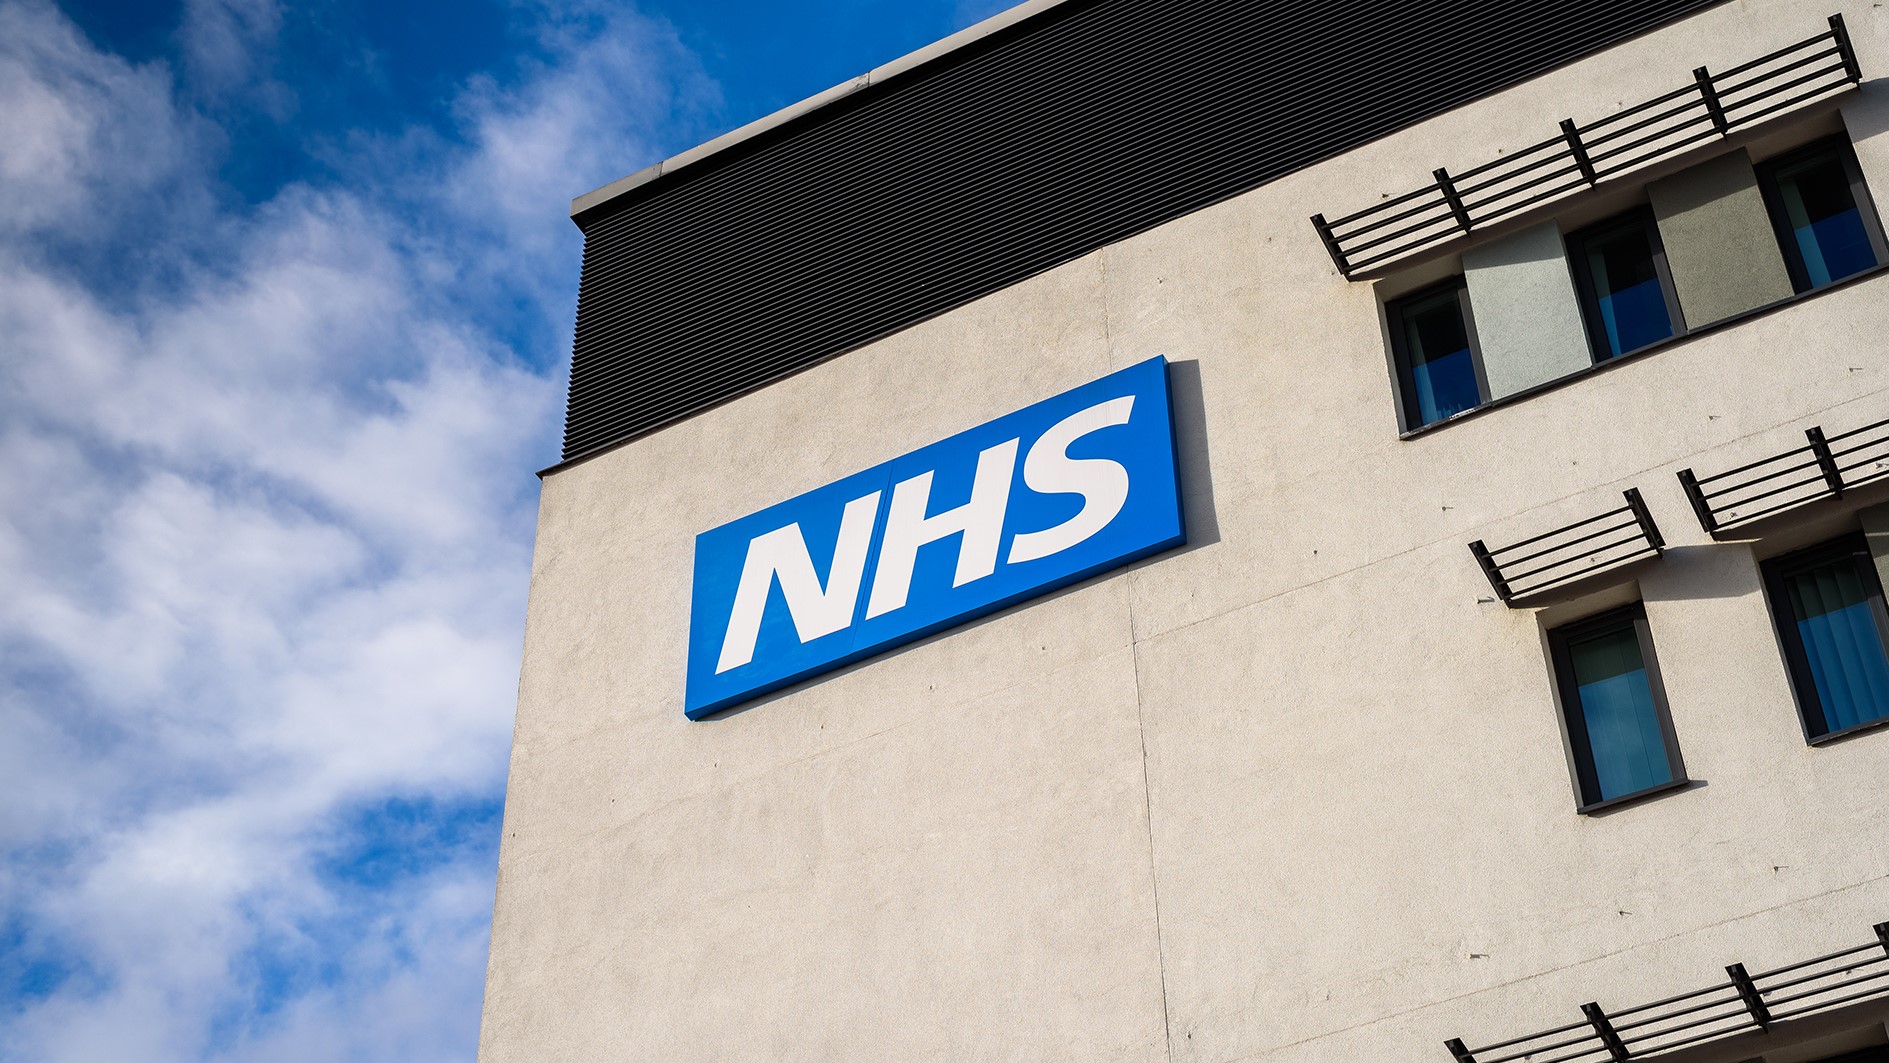 Warrington, United Kingdom - March 6, 2016: Warrington, UK - march 6, 2016: View of the NHS (National Health Service)  logo at the Springfields Medical Centre in the centre of Warrington, Cheshire.